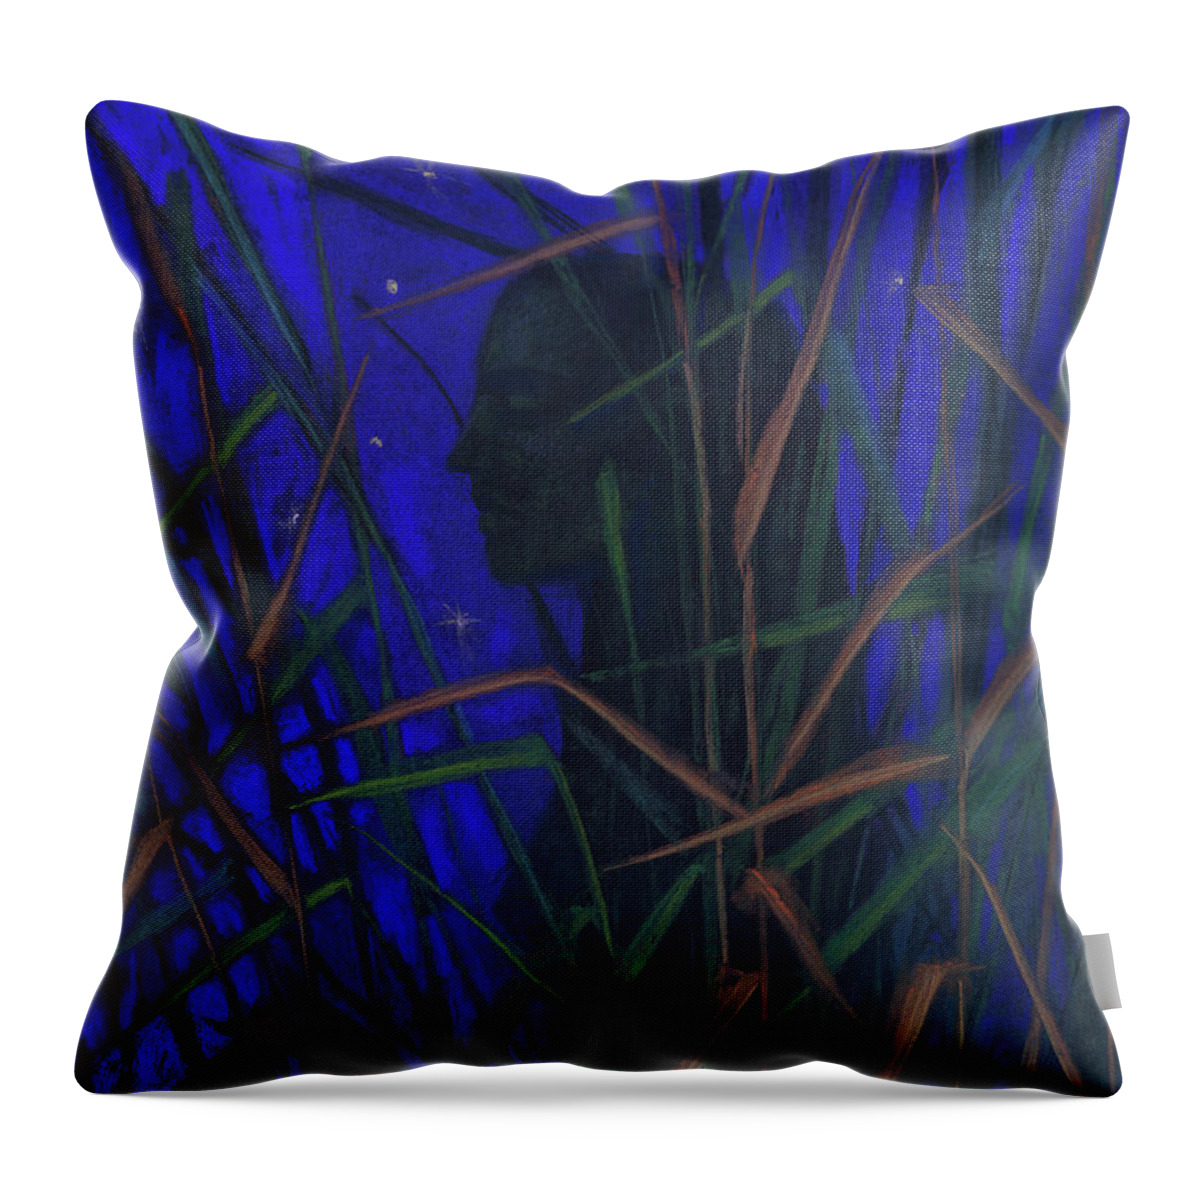 Night Throw Pillow featuring the painting The Night by Julia Khoroshikh